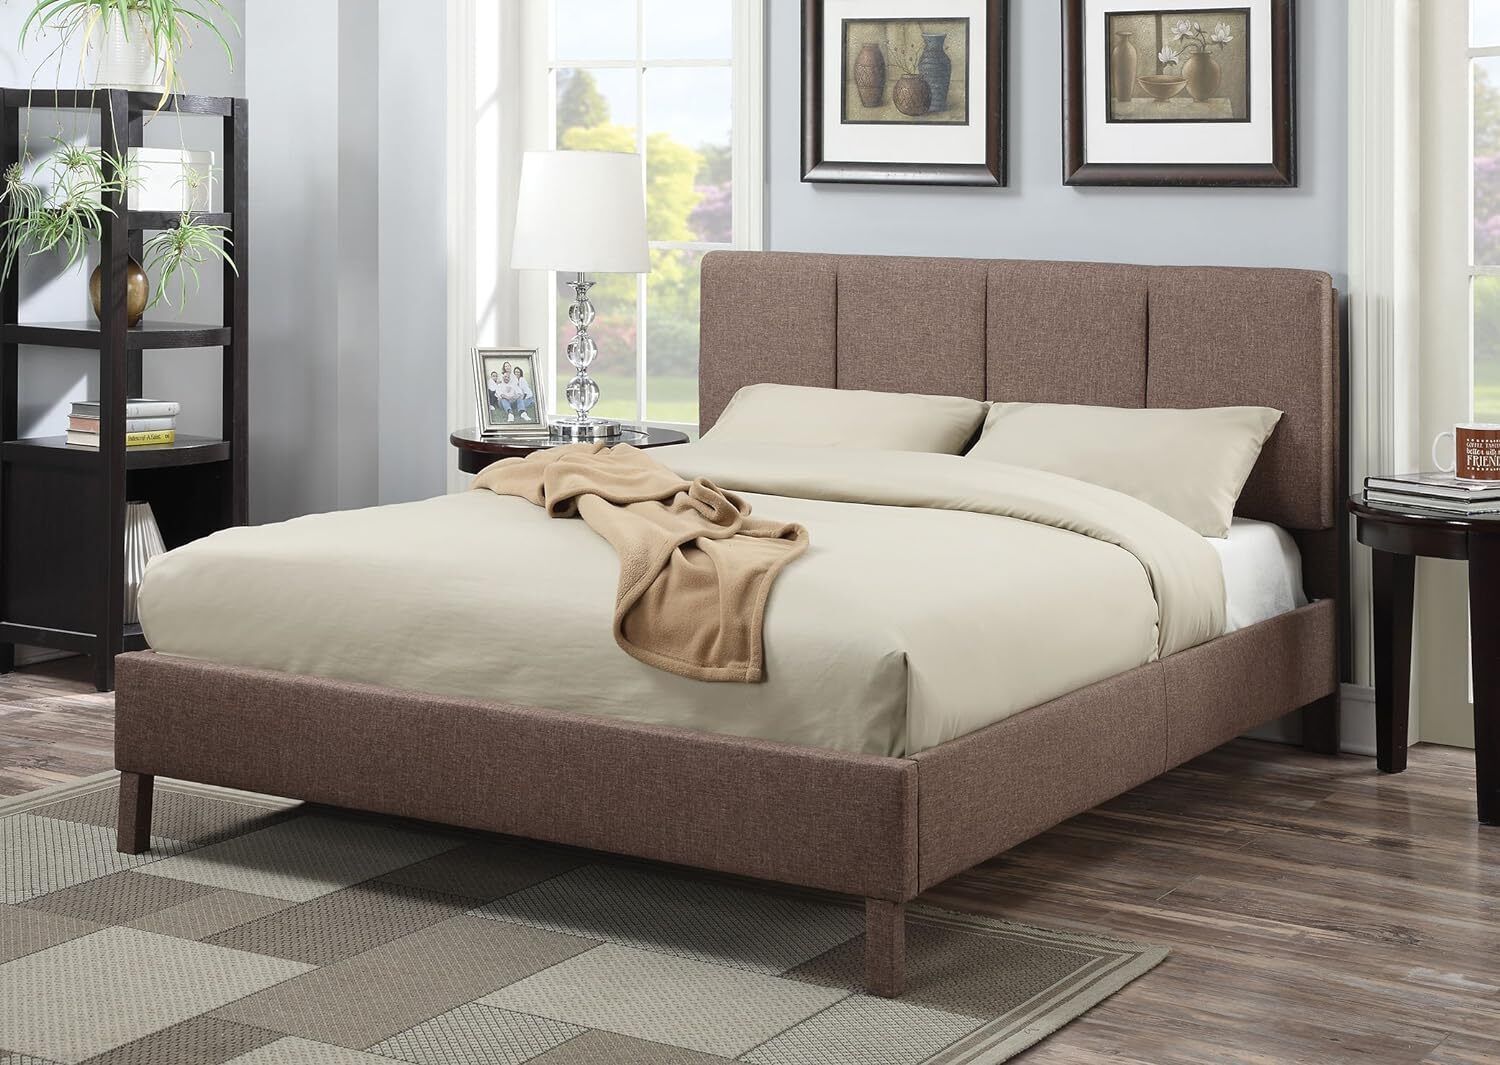 ACME Furniture Rosanna Bed with Headboard/Footboard King, Light Brown Linen 